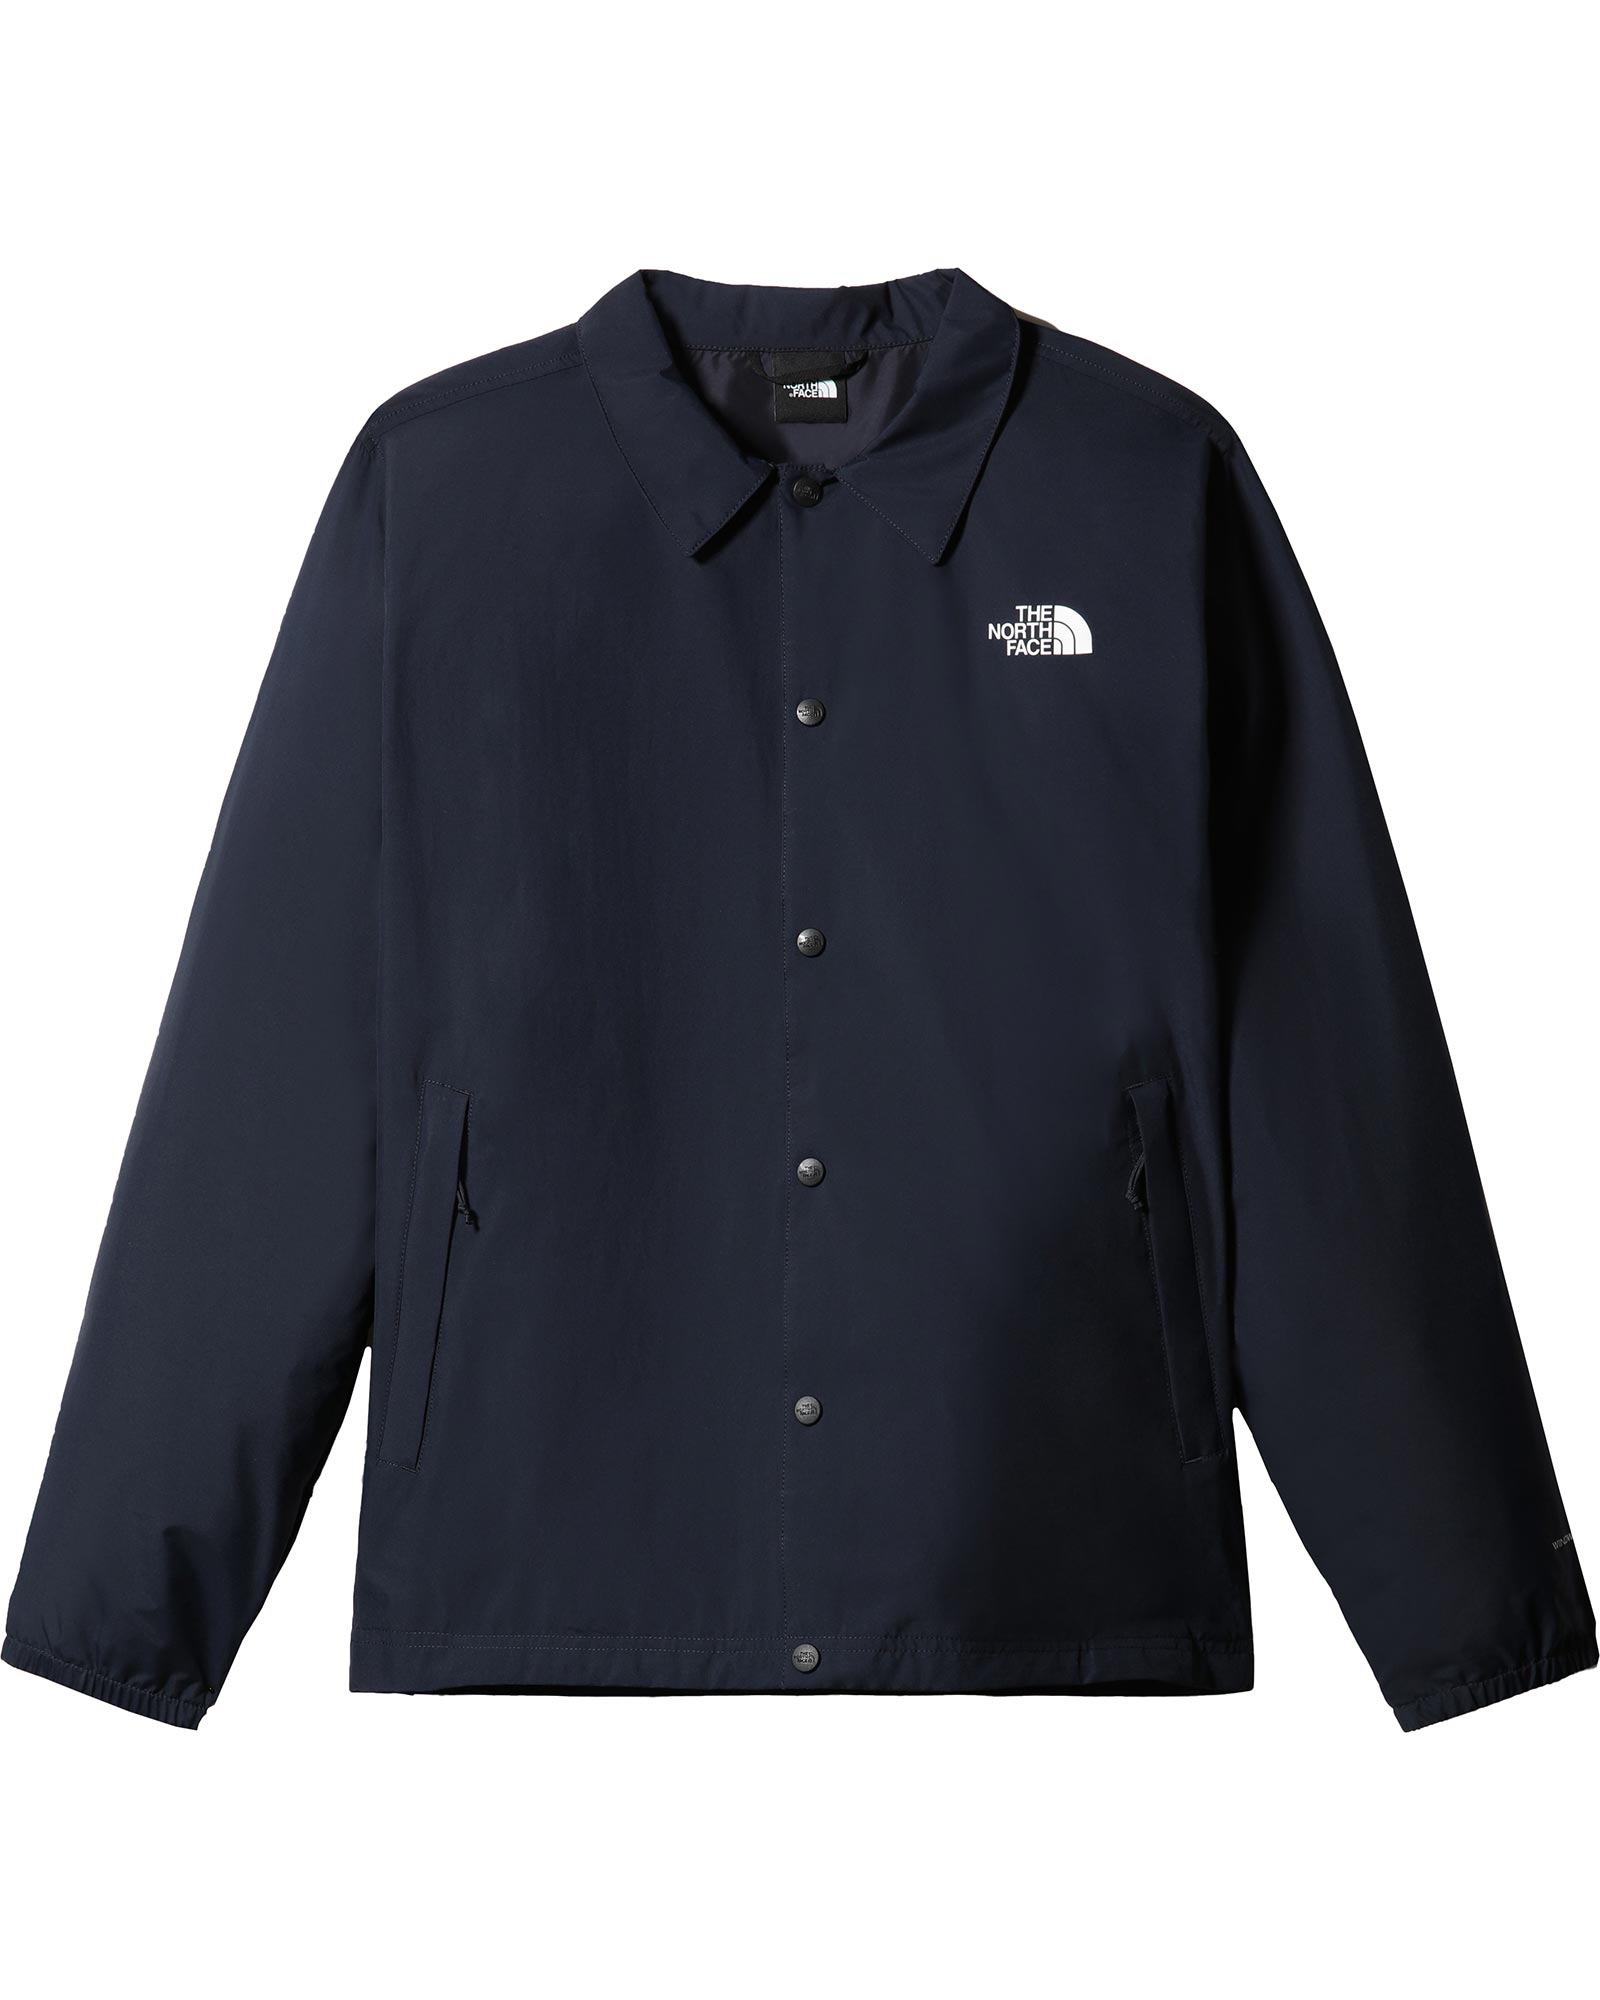 The North Face Coach Mens Jacket